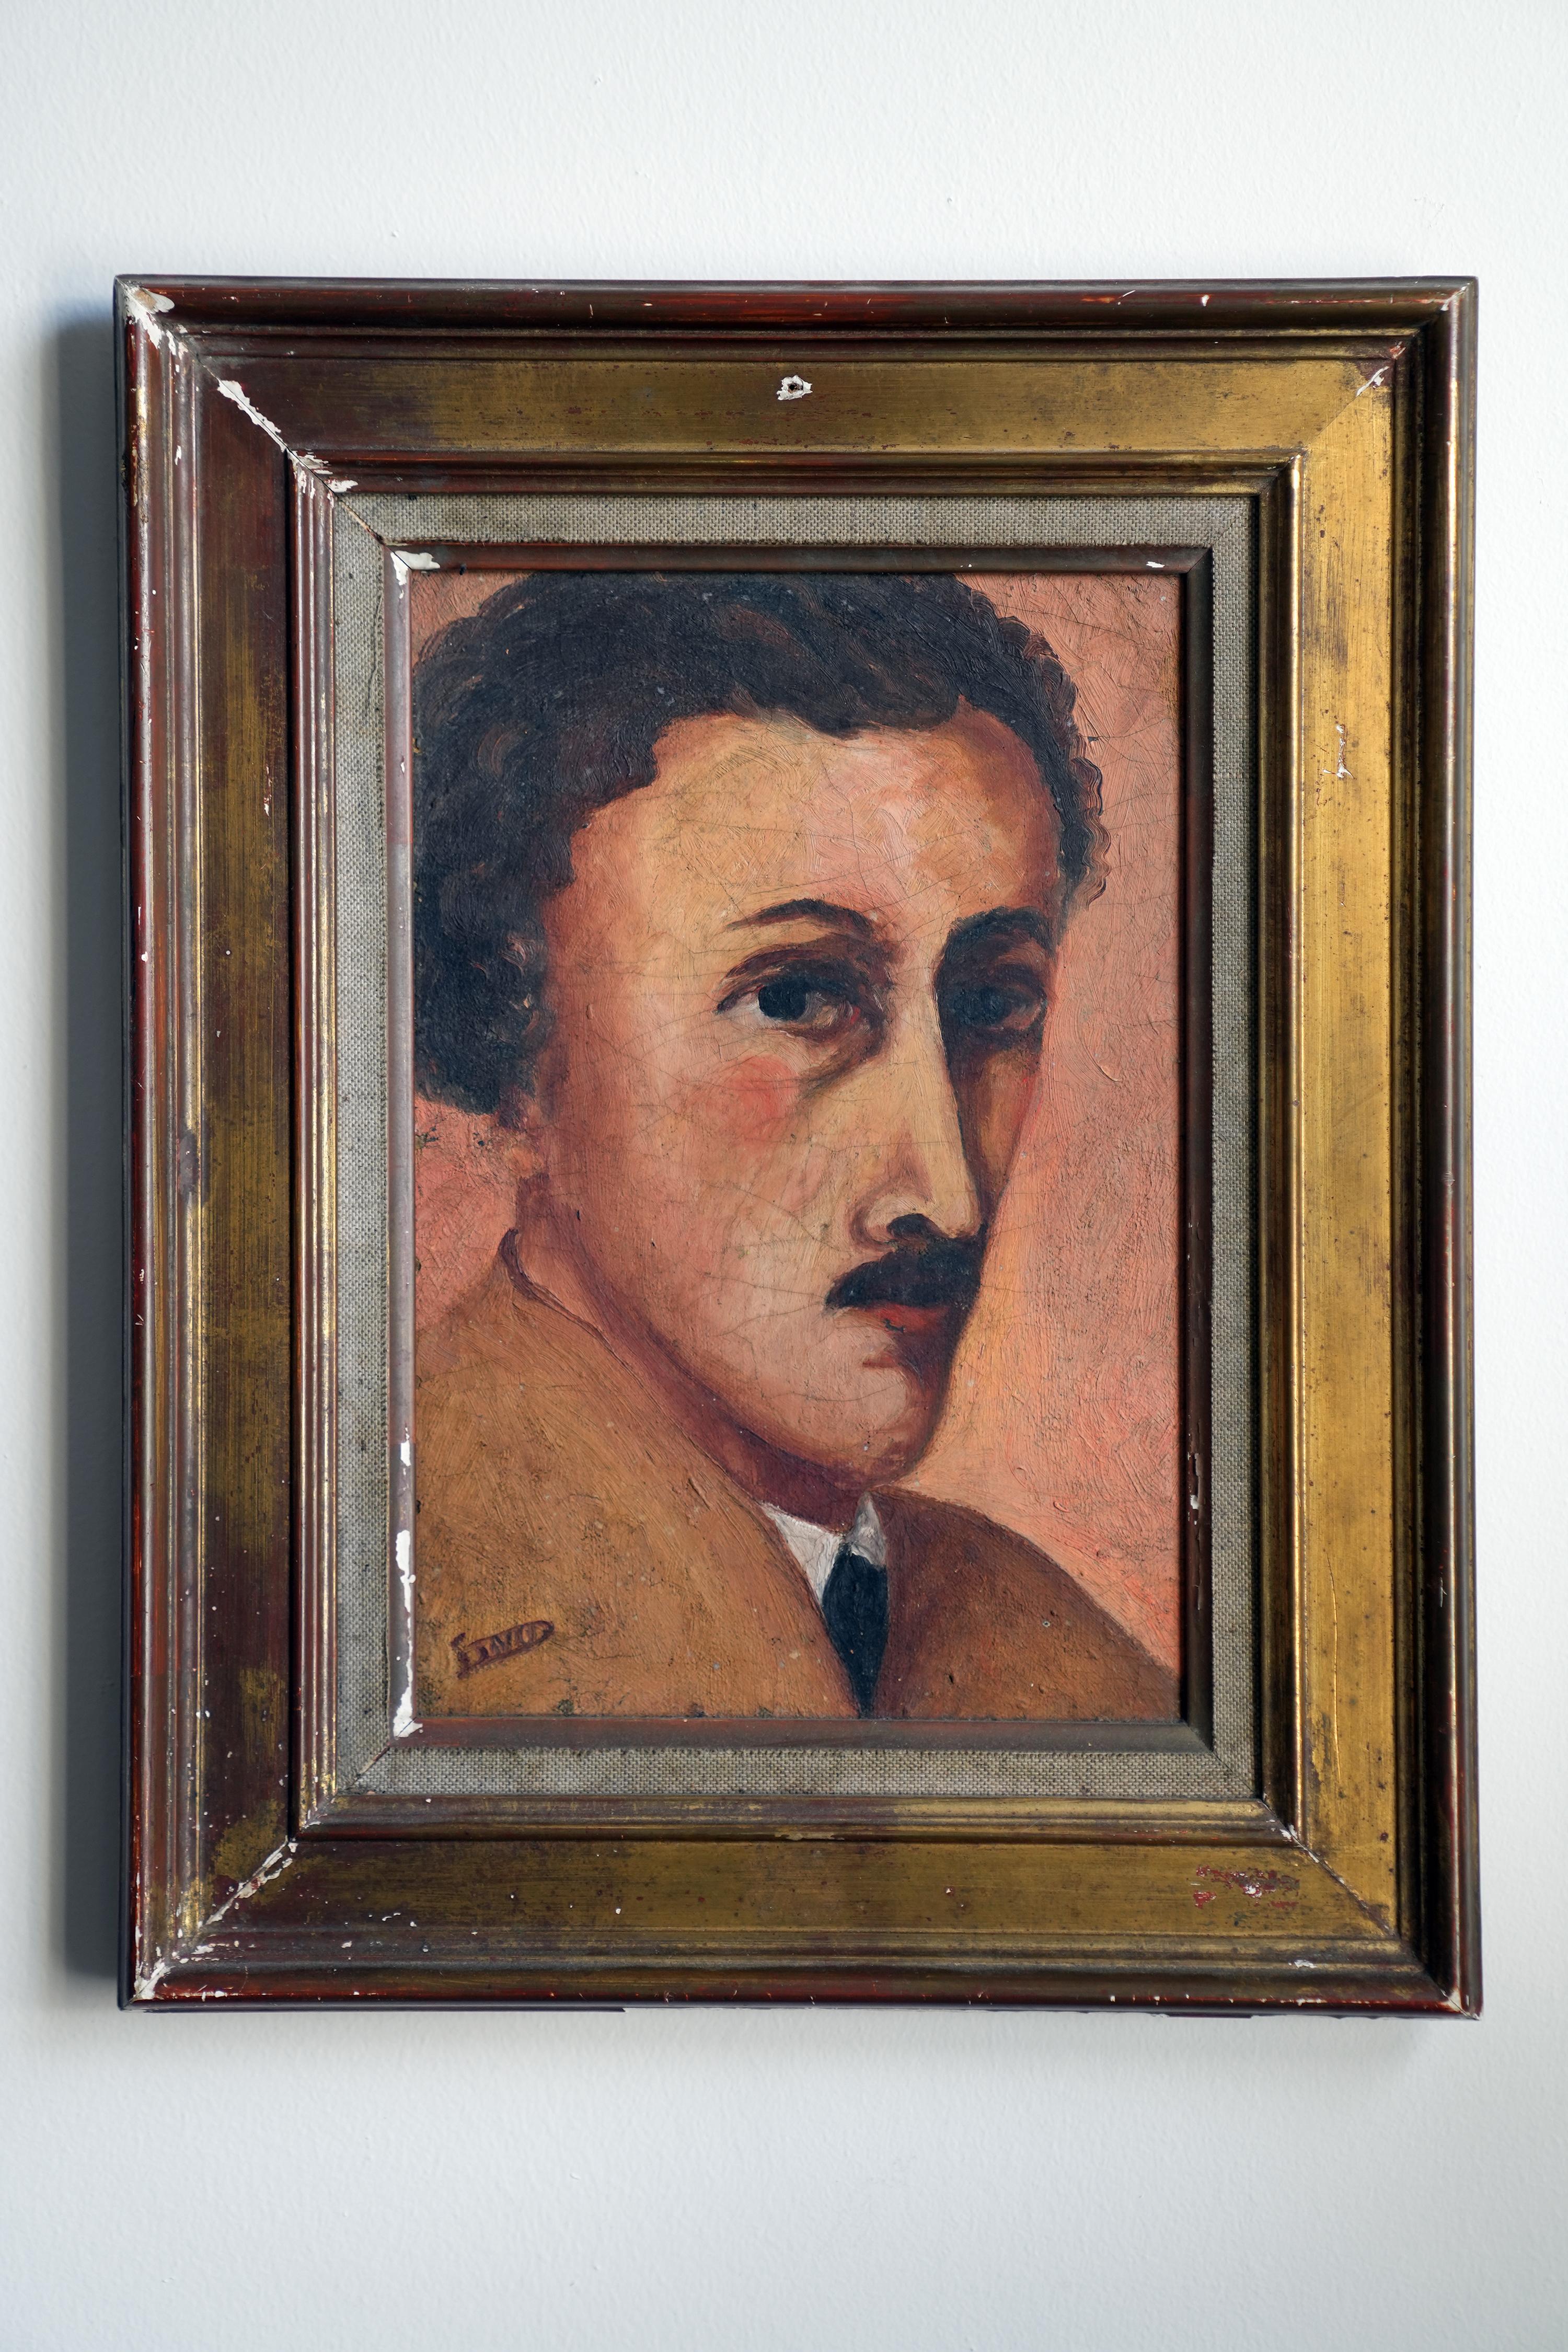 Ferdinand Desnos (1901-1958) self portrait
French
Signed and inscribed verso 